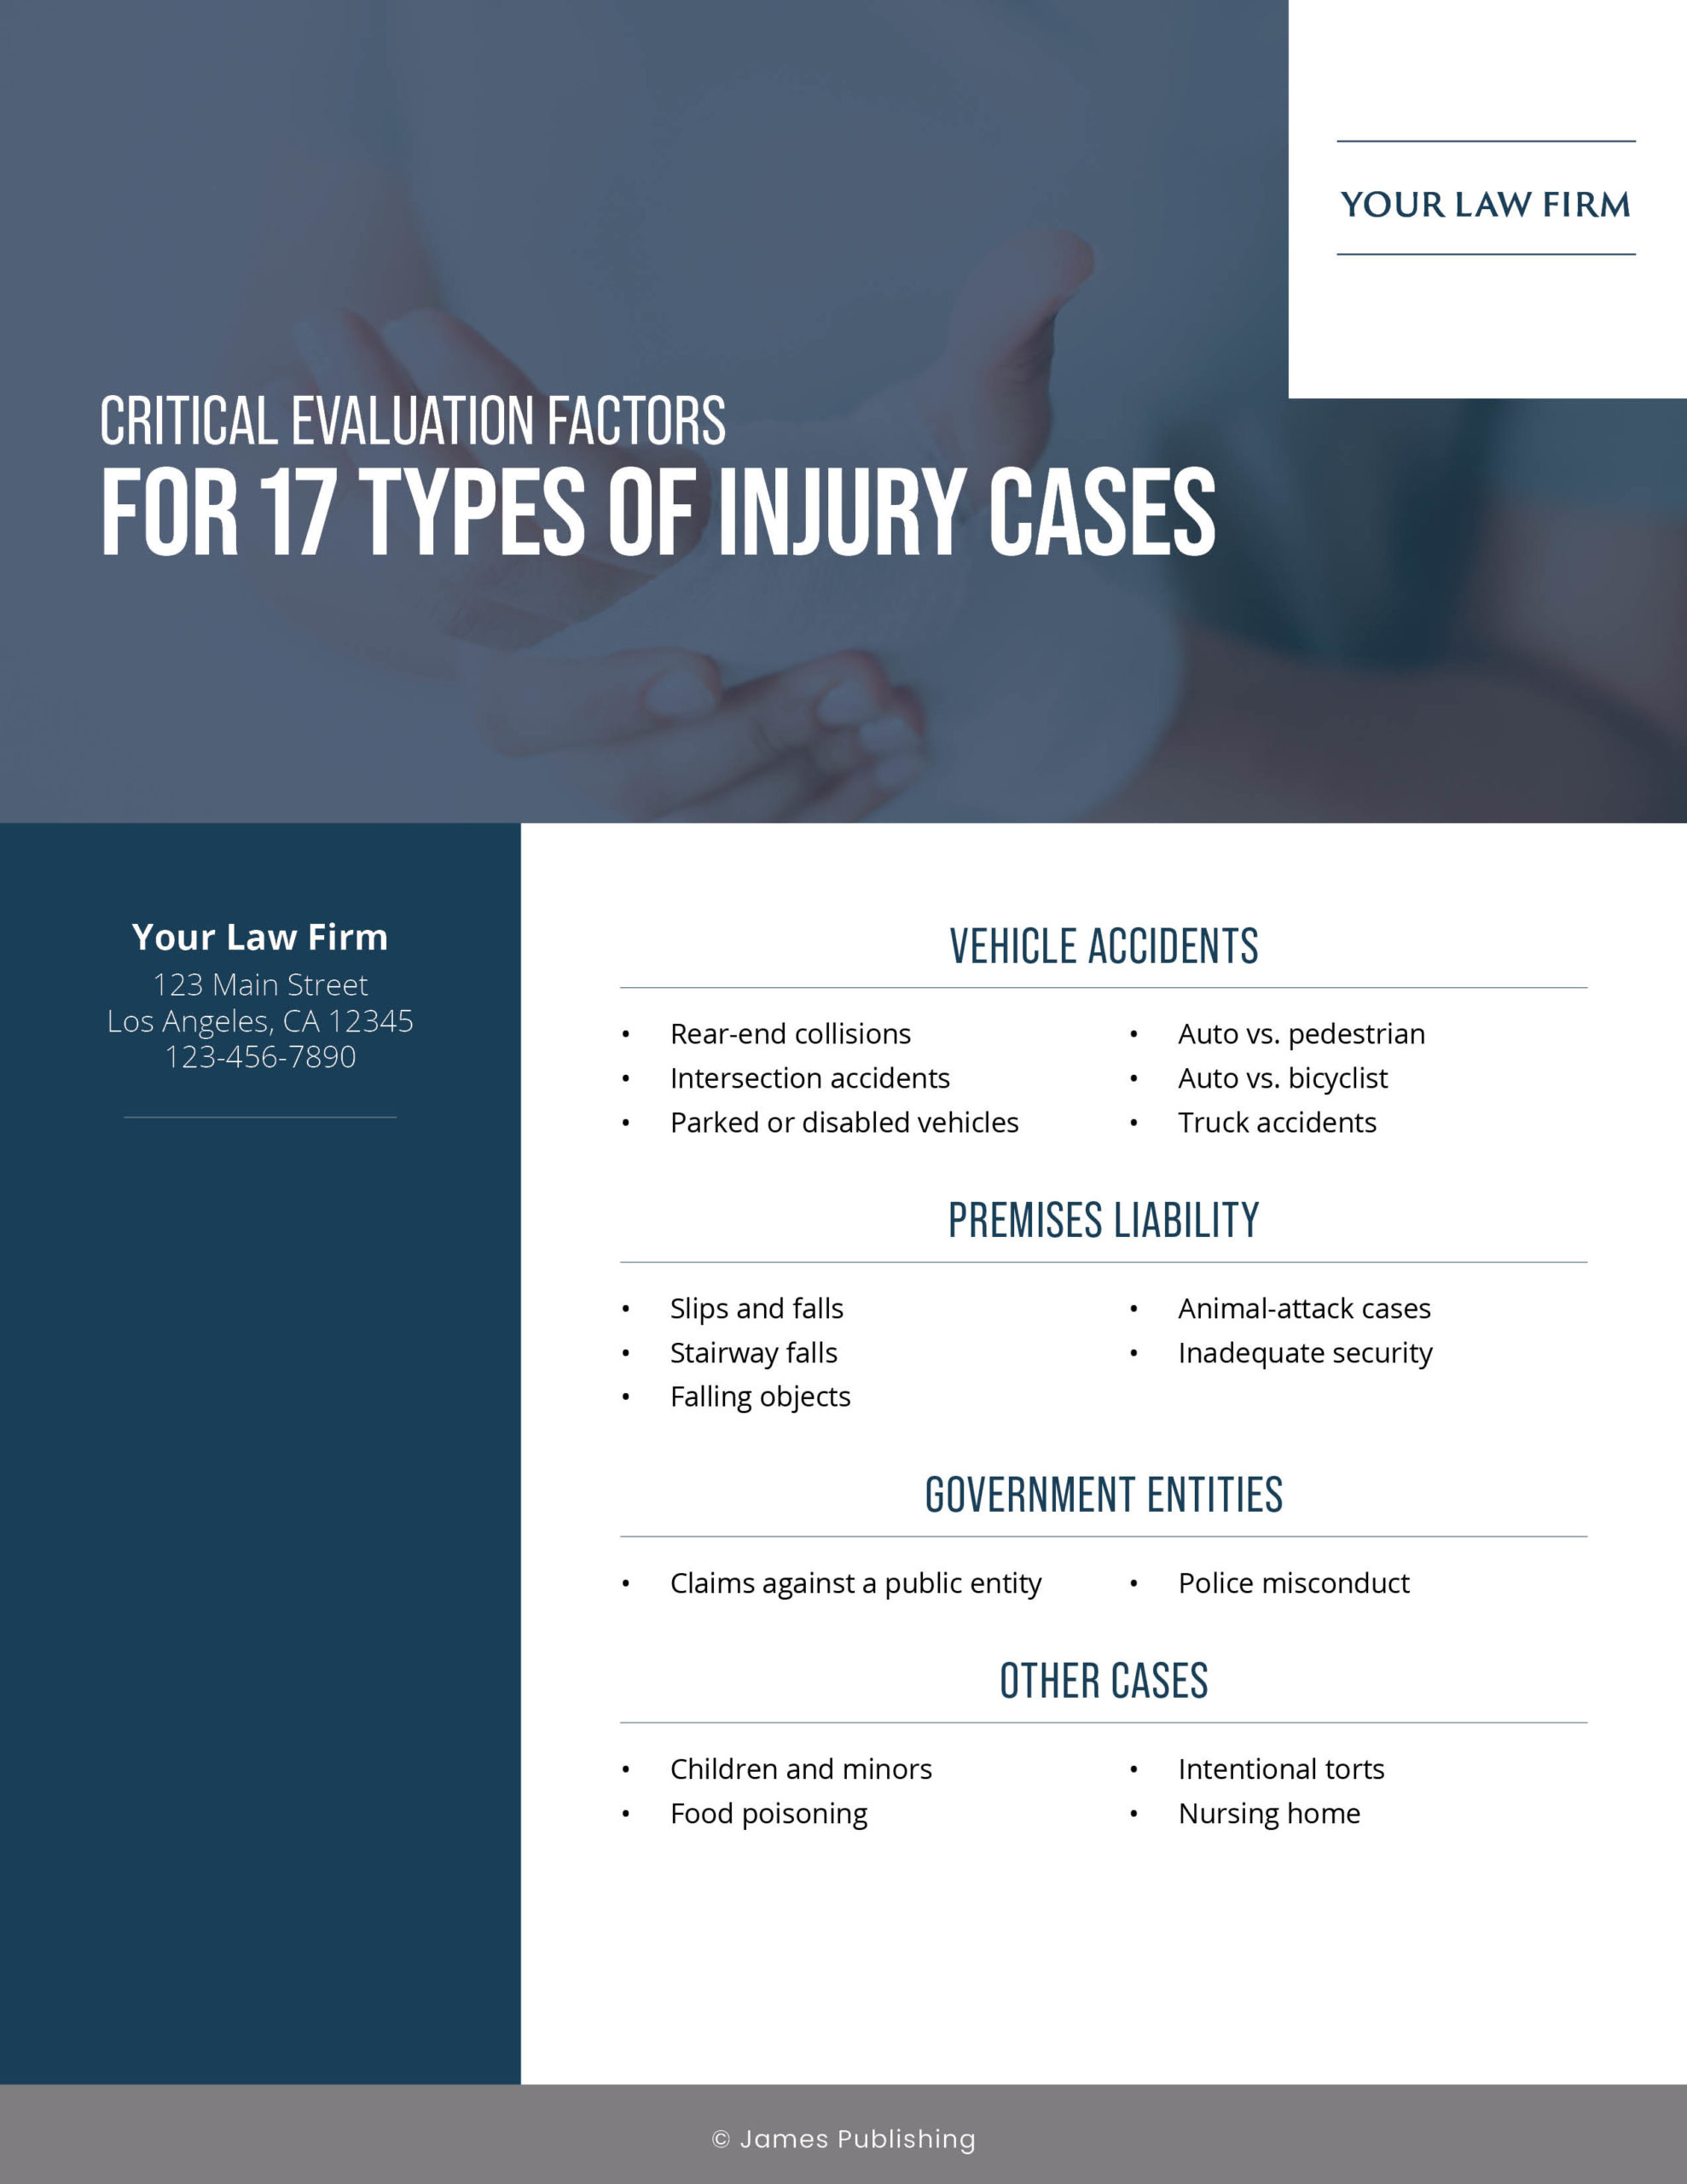 PI-11 Critical Evaluation Factors for 17 Types of Injury Cases